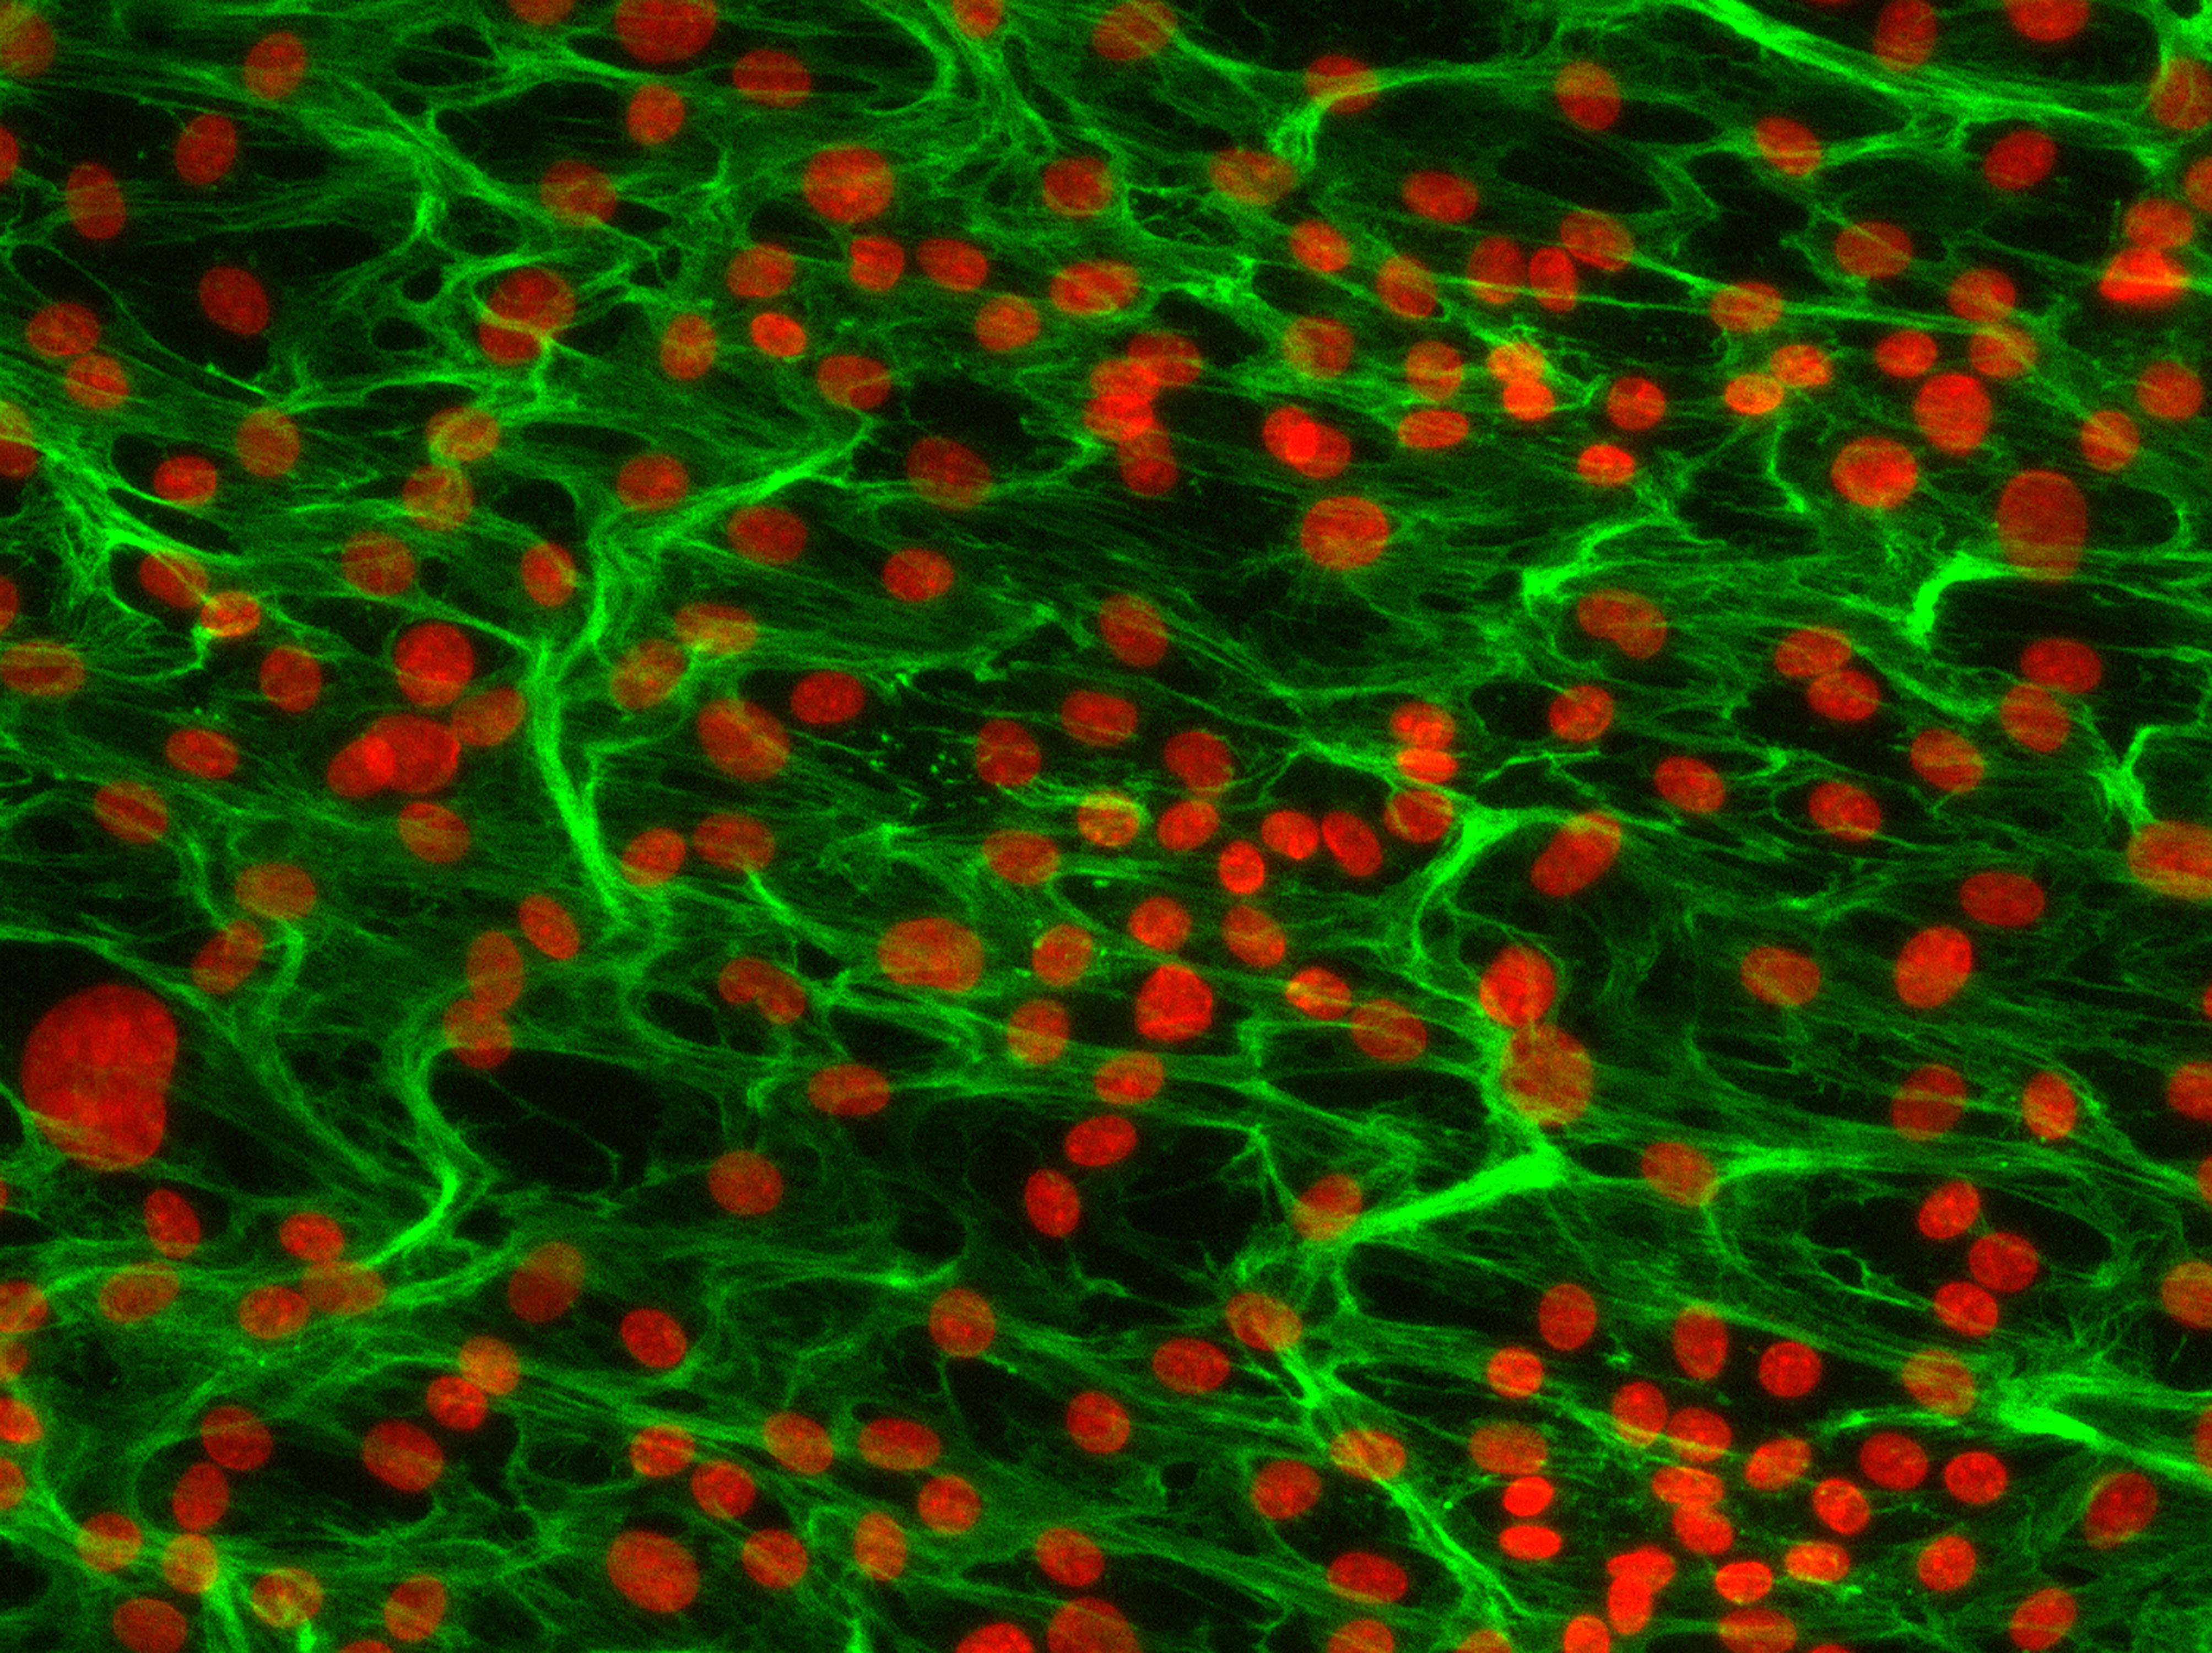 endothelial cells and the extracellular matrix beneath them, from an in in vitro experiment